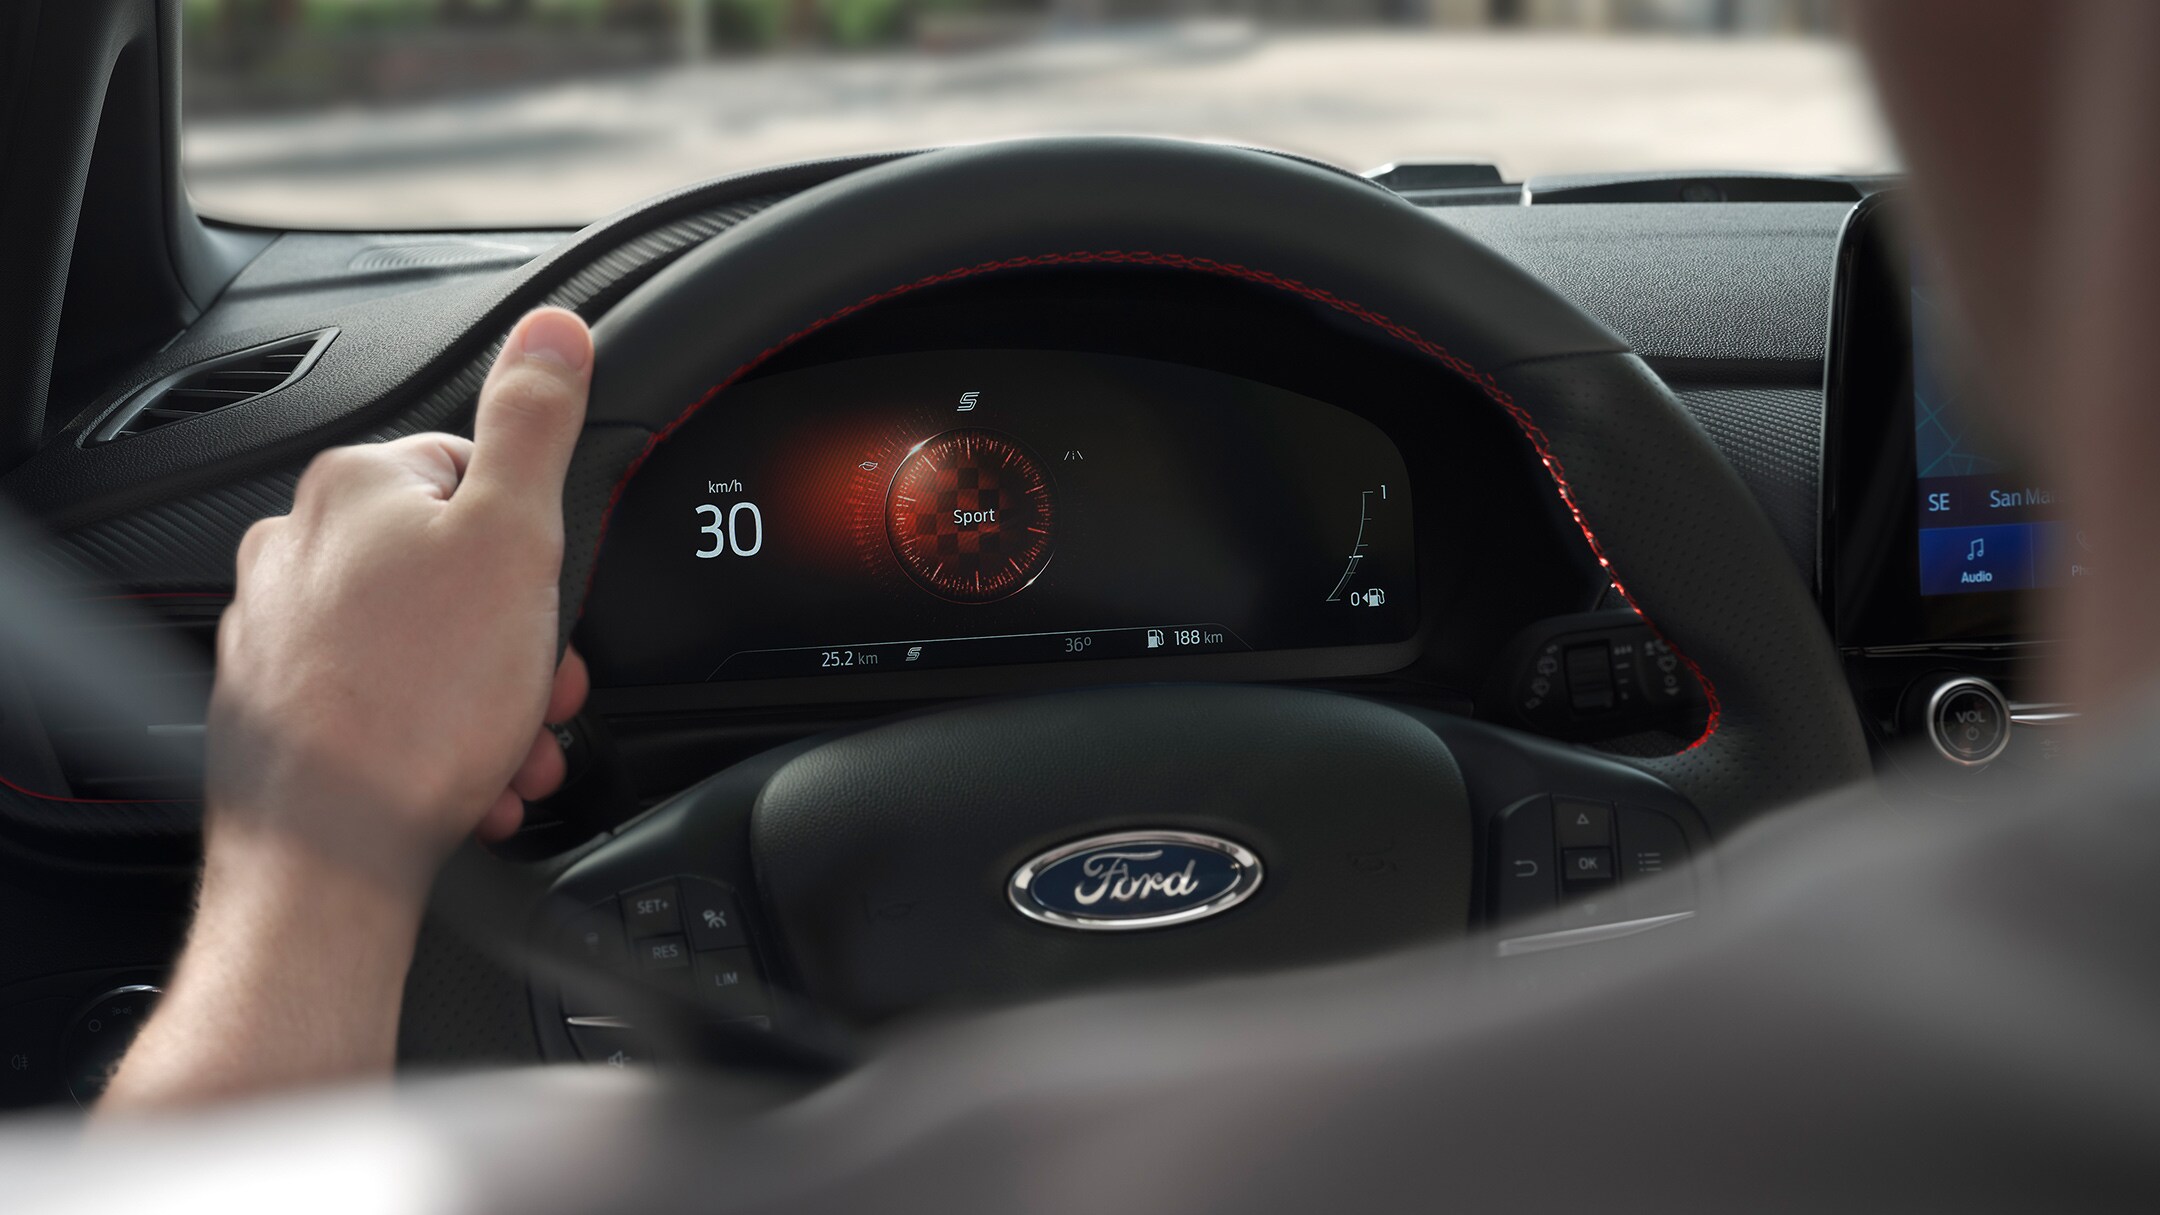 Ford Fiesta displaying selectable drive modes